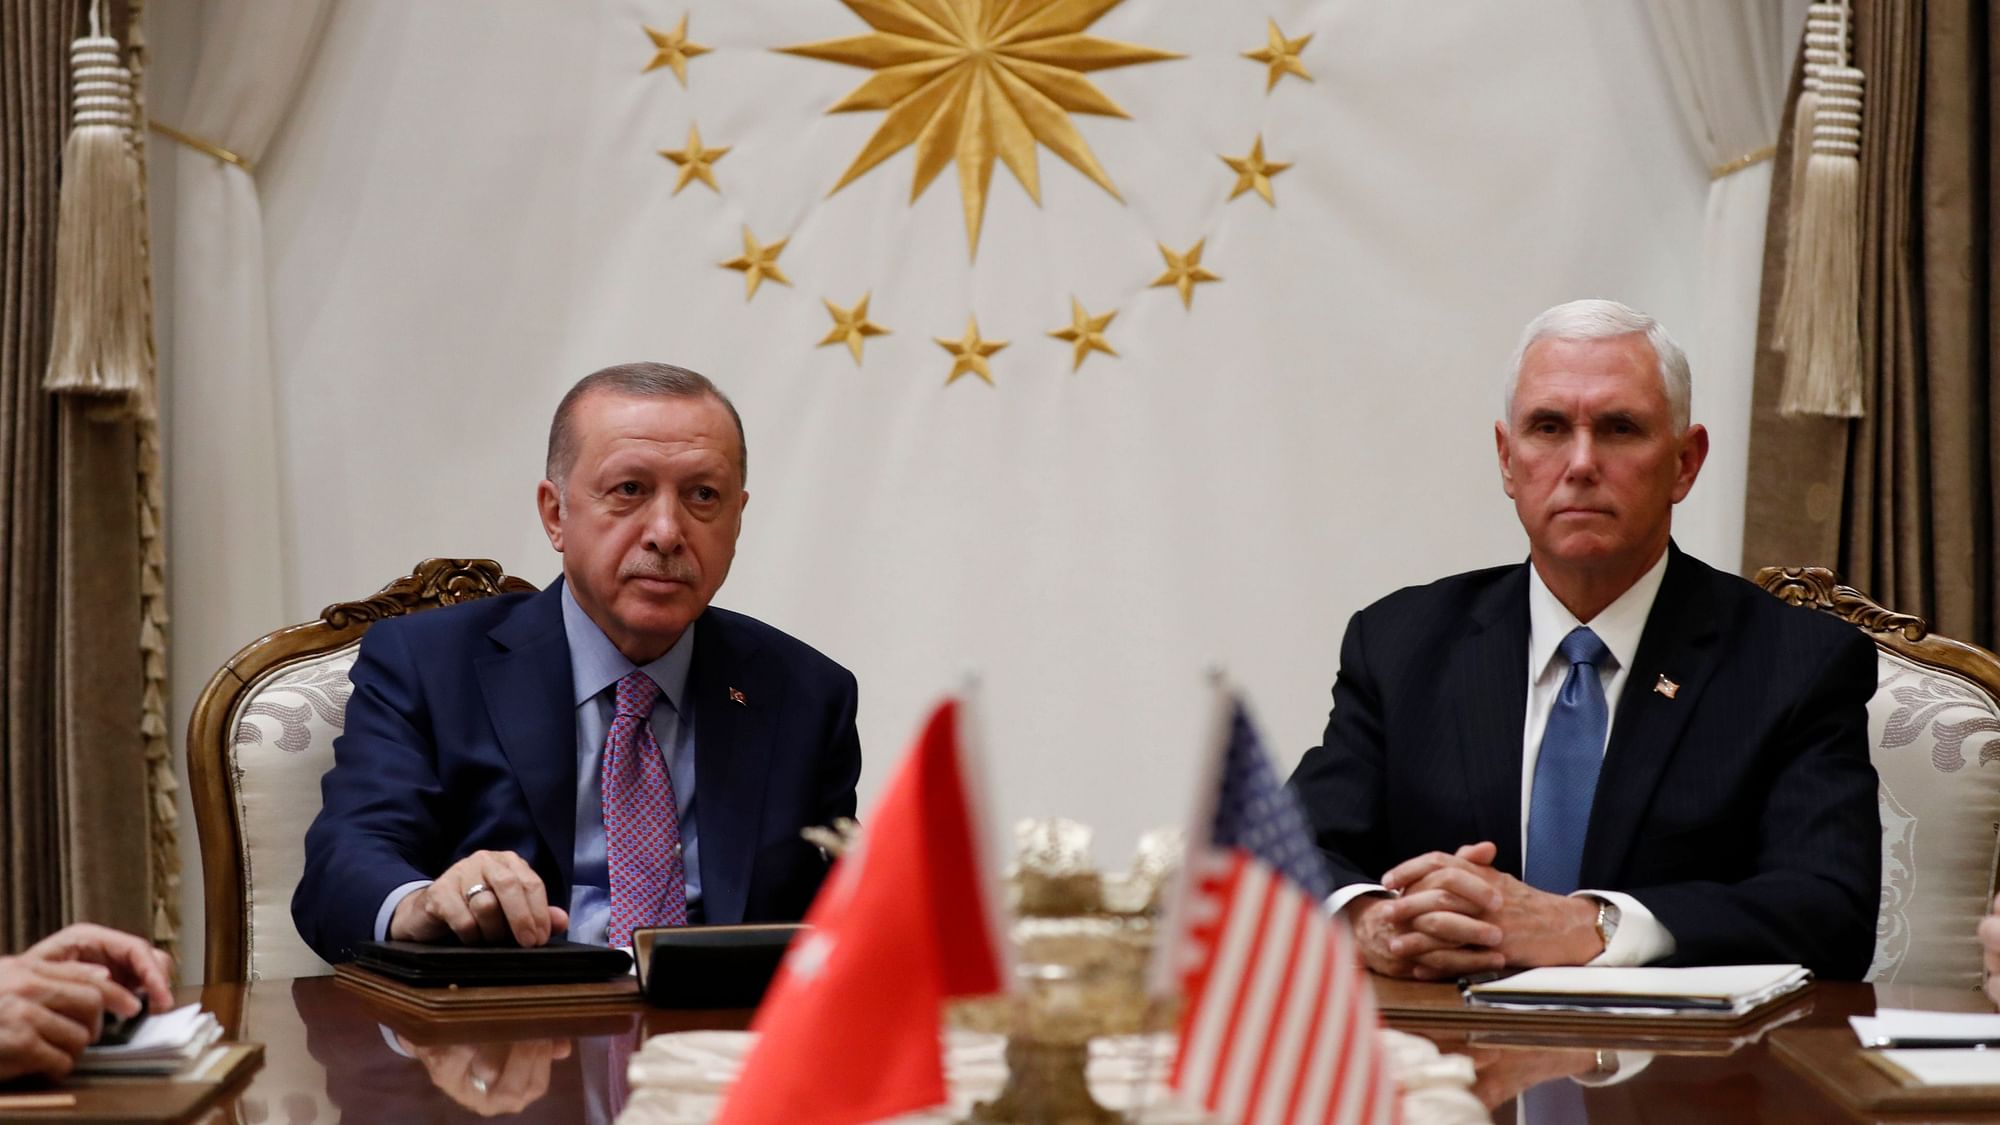 Vice President Mike Pence meets with Turkish President Recep Tayyip Erdogan at the Presidential Palace for talks on the Kurds and Syria.